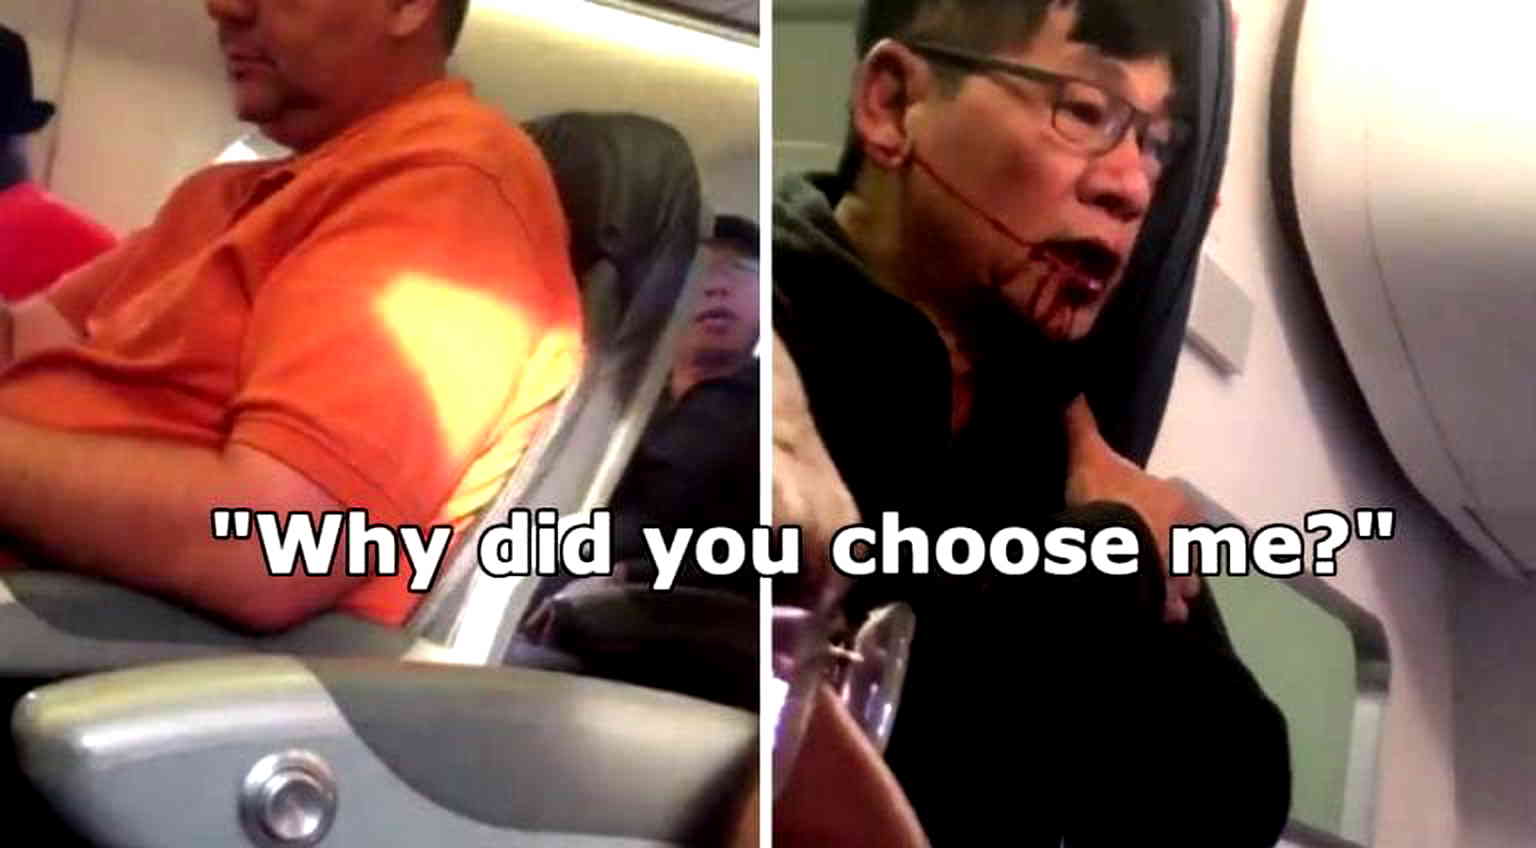 New Clip Surfaces Showing Moments Before Officers Violently Assault Asian Passenger